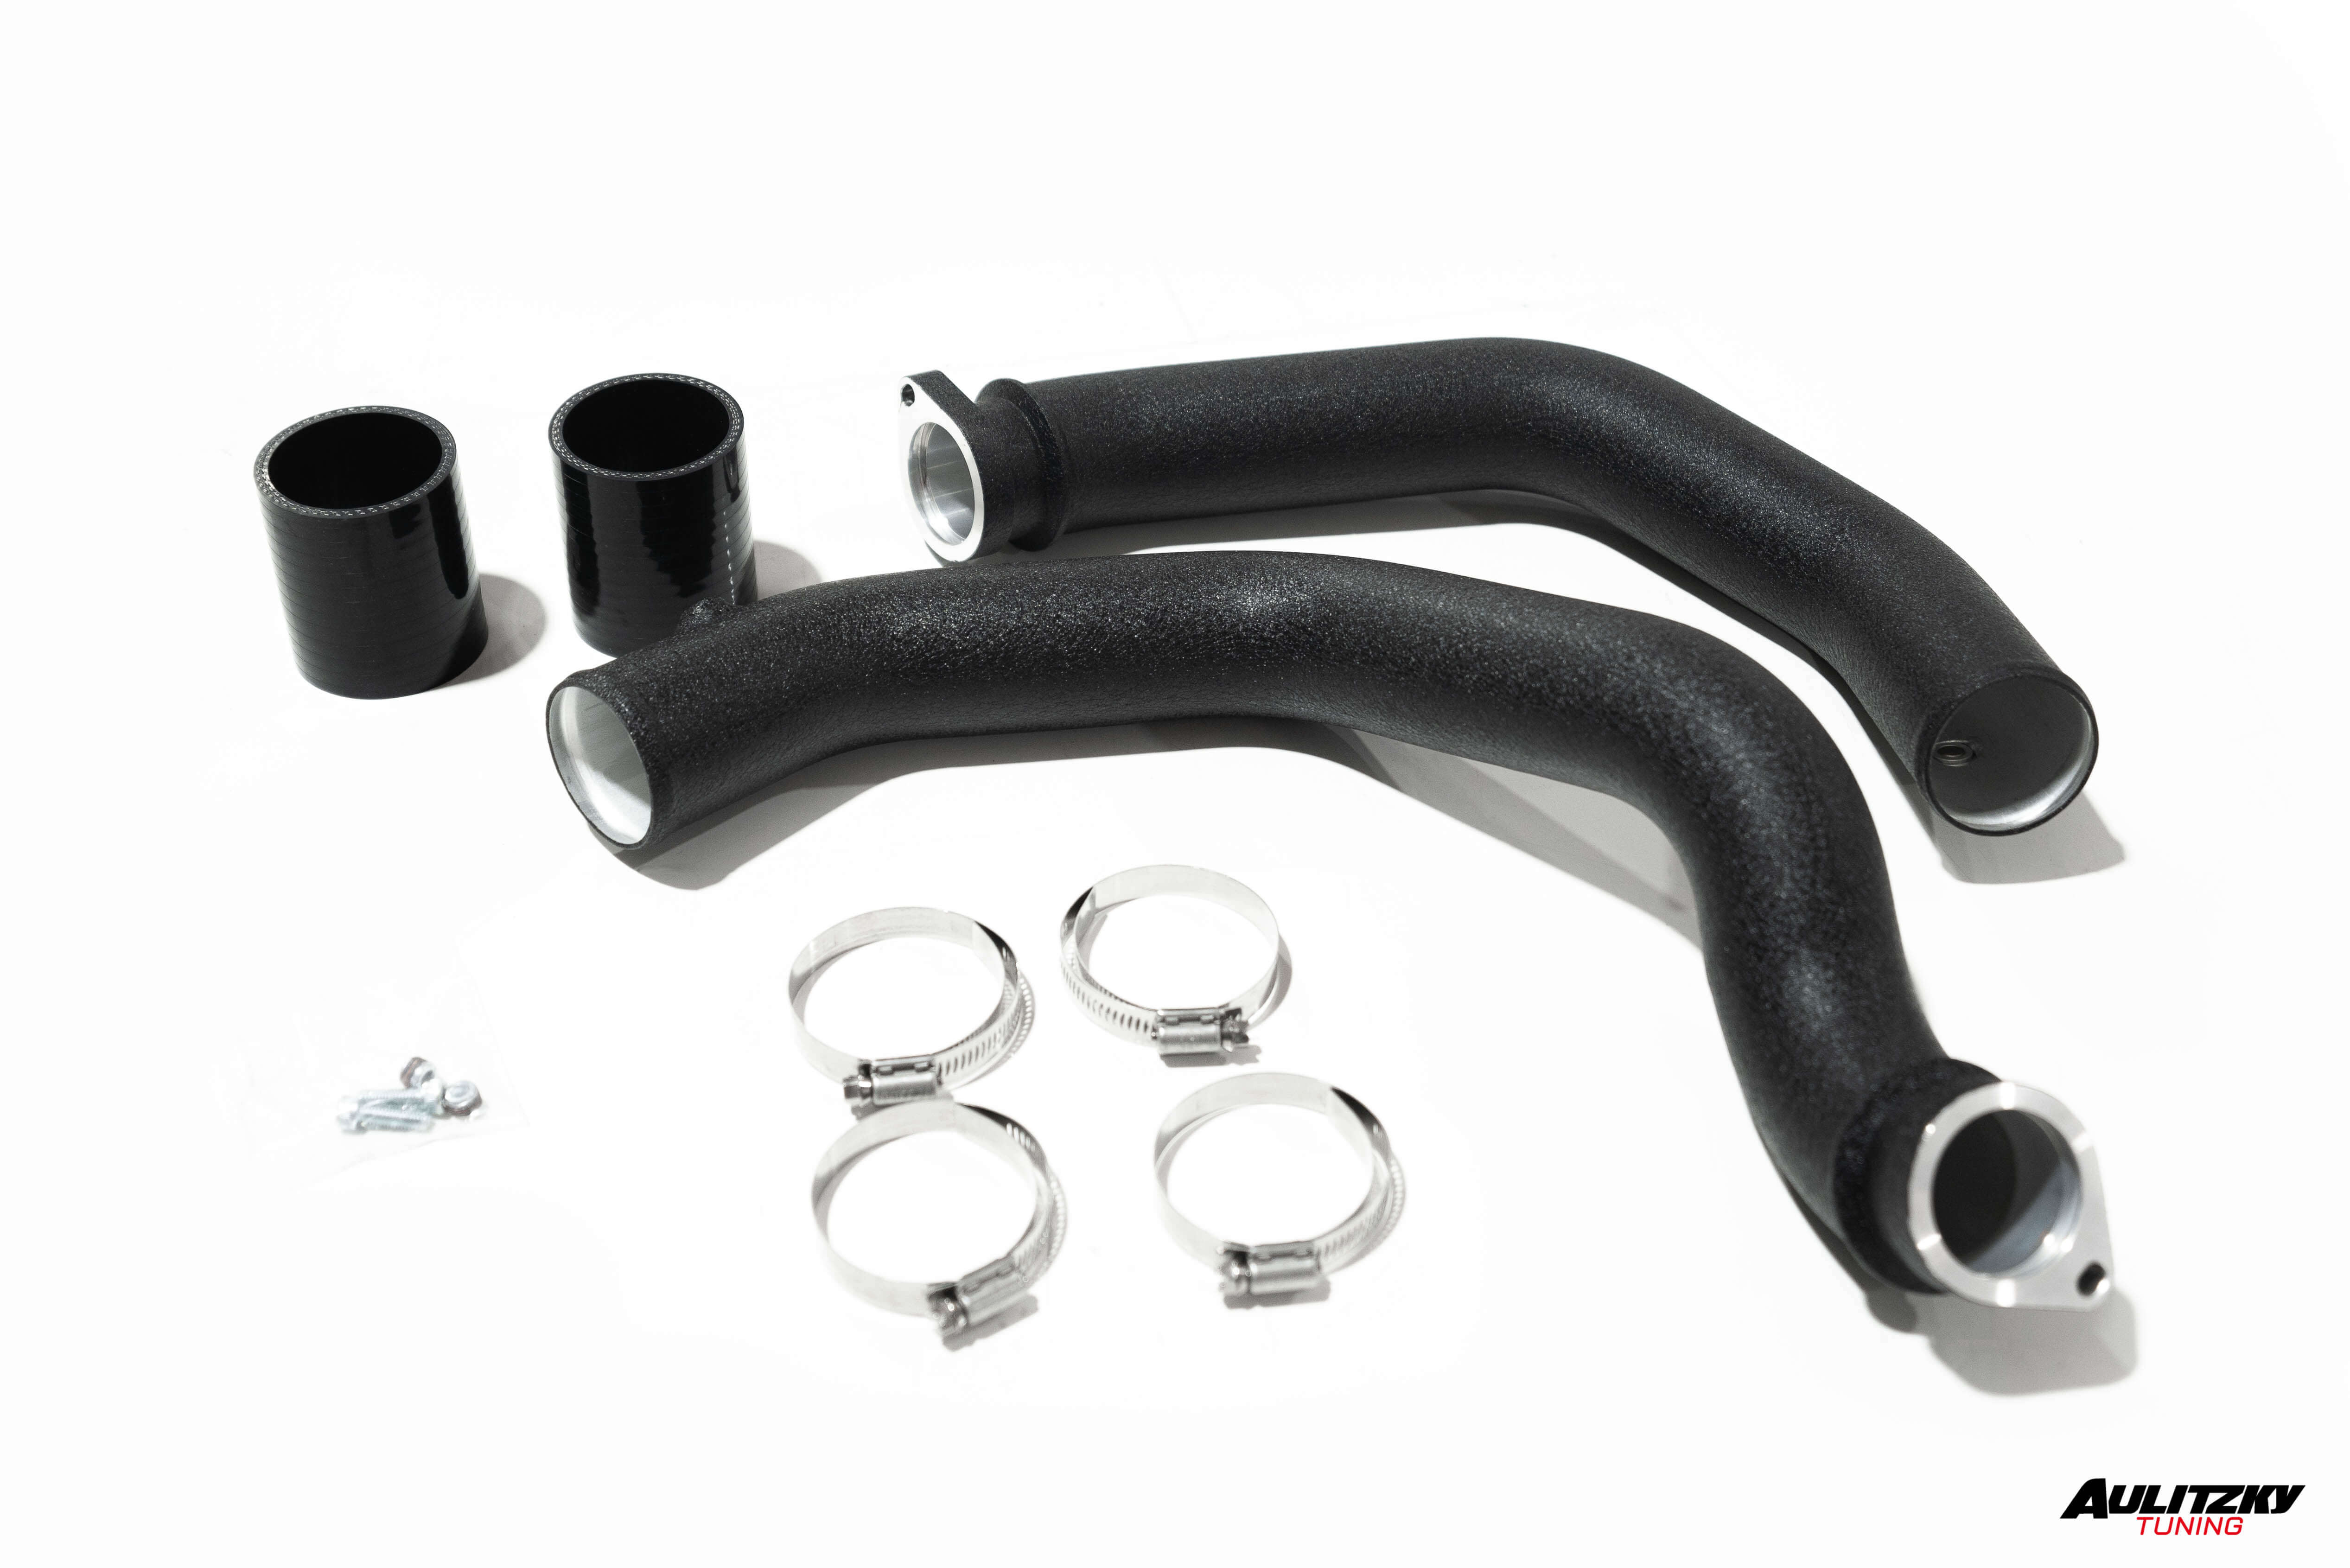 Aulitzky Tuning | Charge- & Boostpipe Set Aluminium schwarz | BMW M3/M4 inkl. Competition/CS (F80/F82/F83) S55